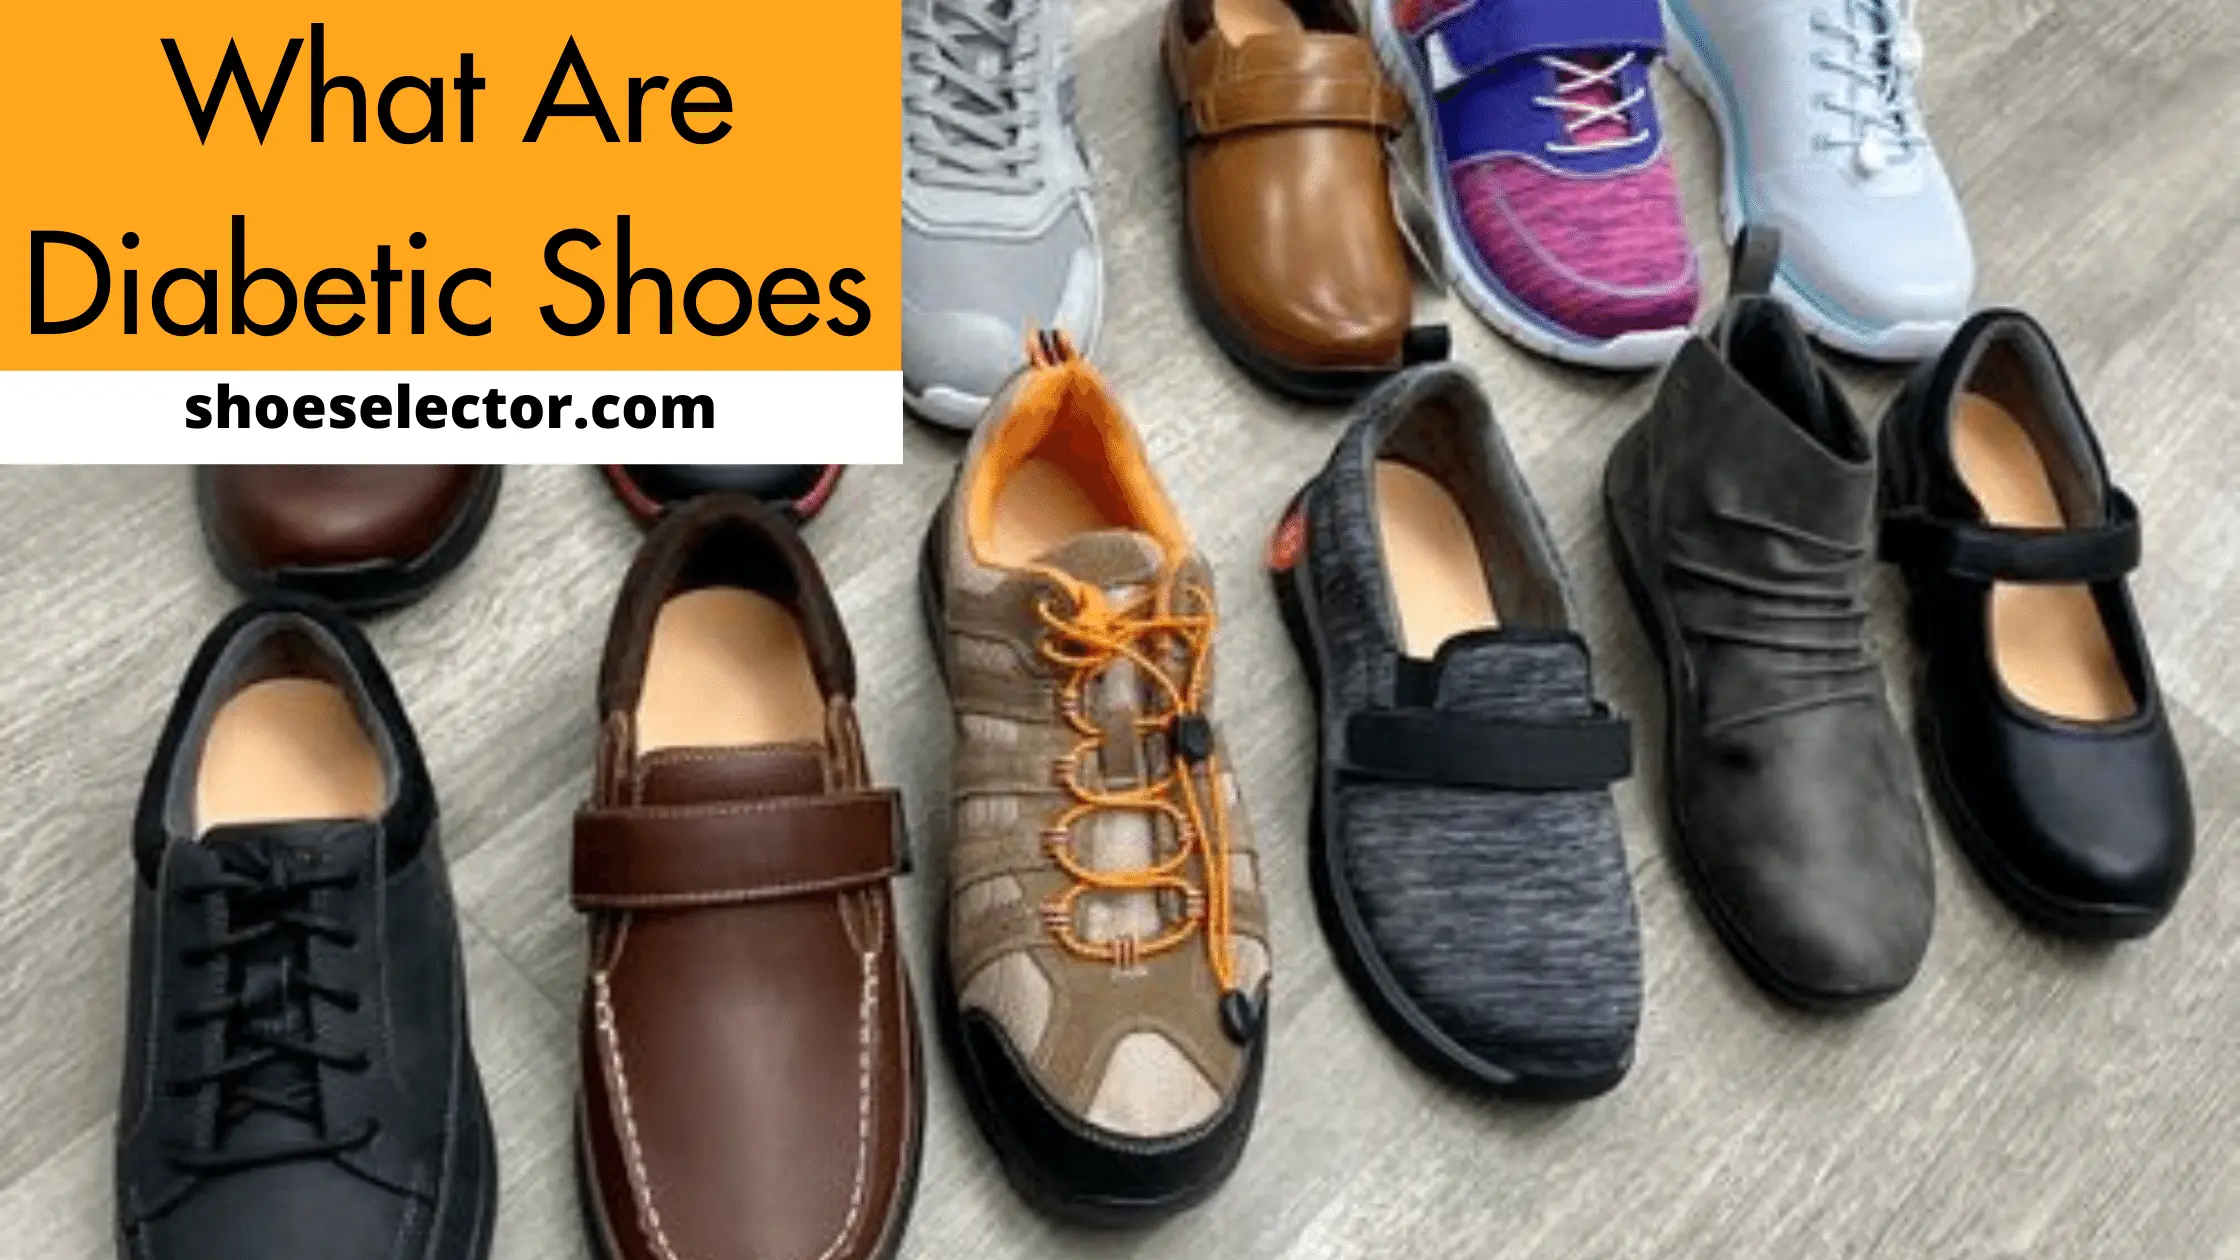 What Are Diabetic Shoes? - Why People Choose Them